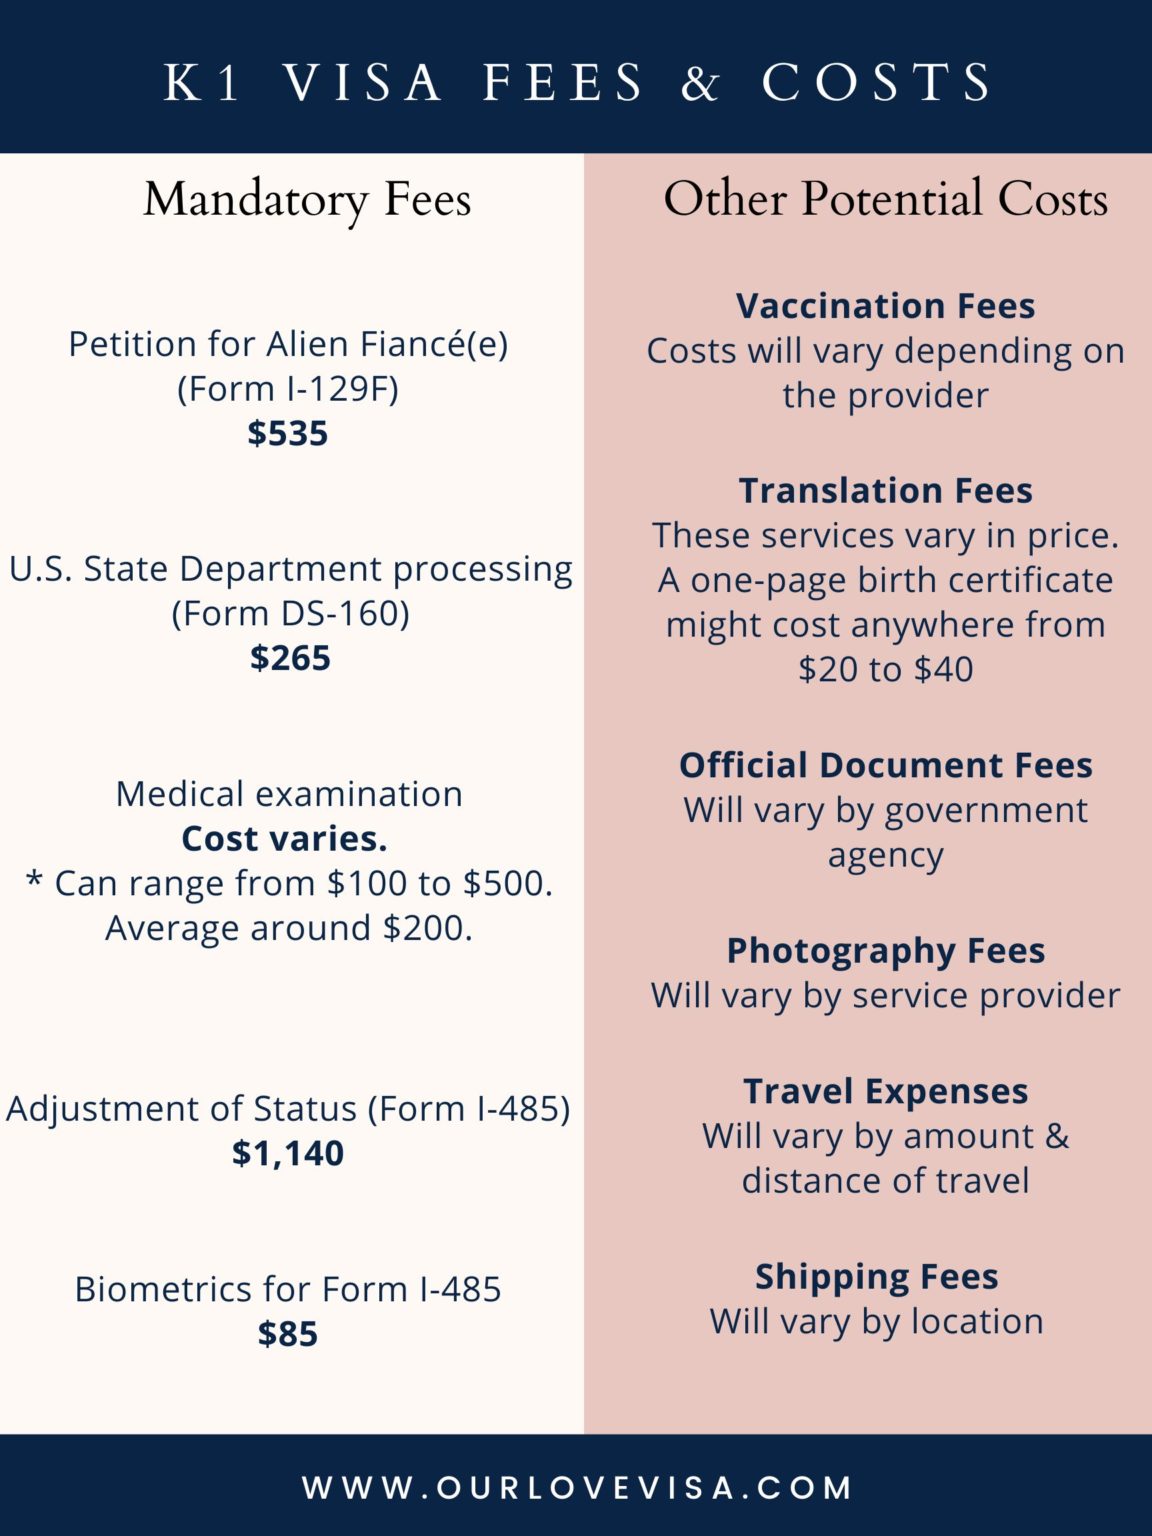 How Much Does a K1 Visa Cost?